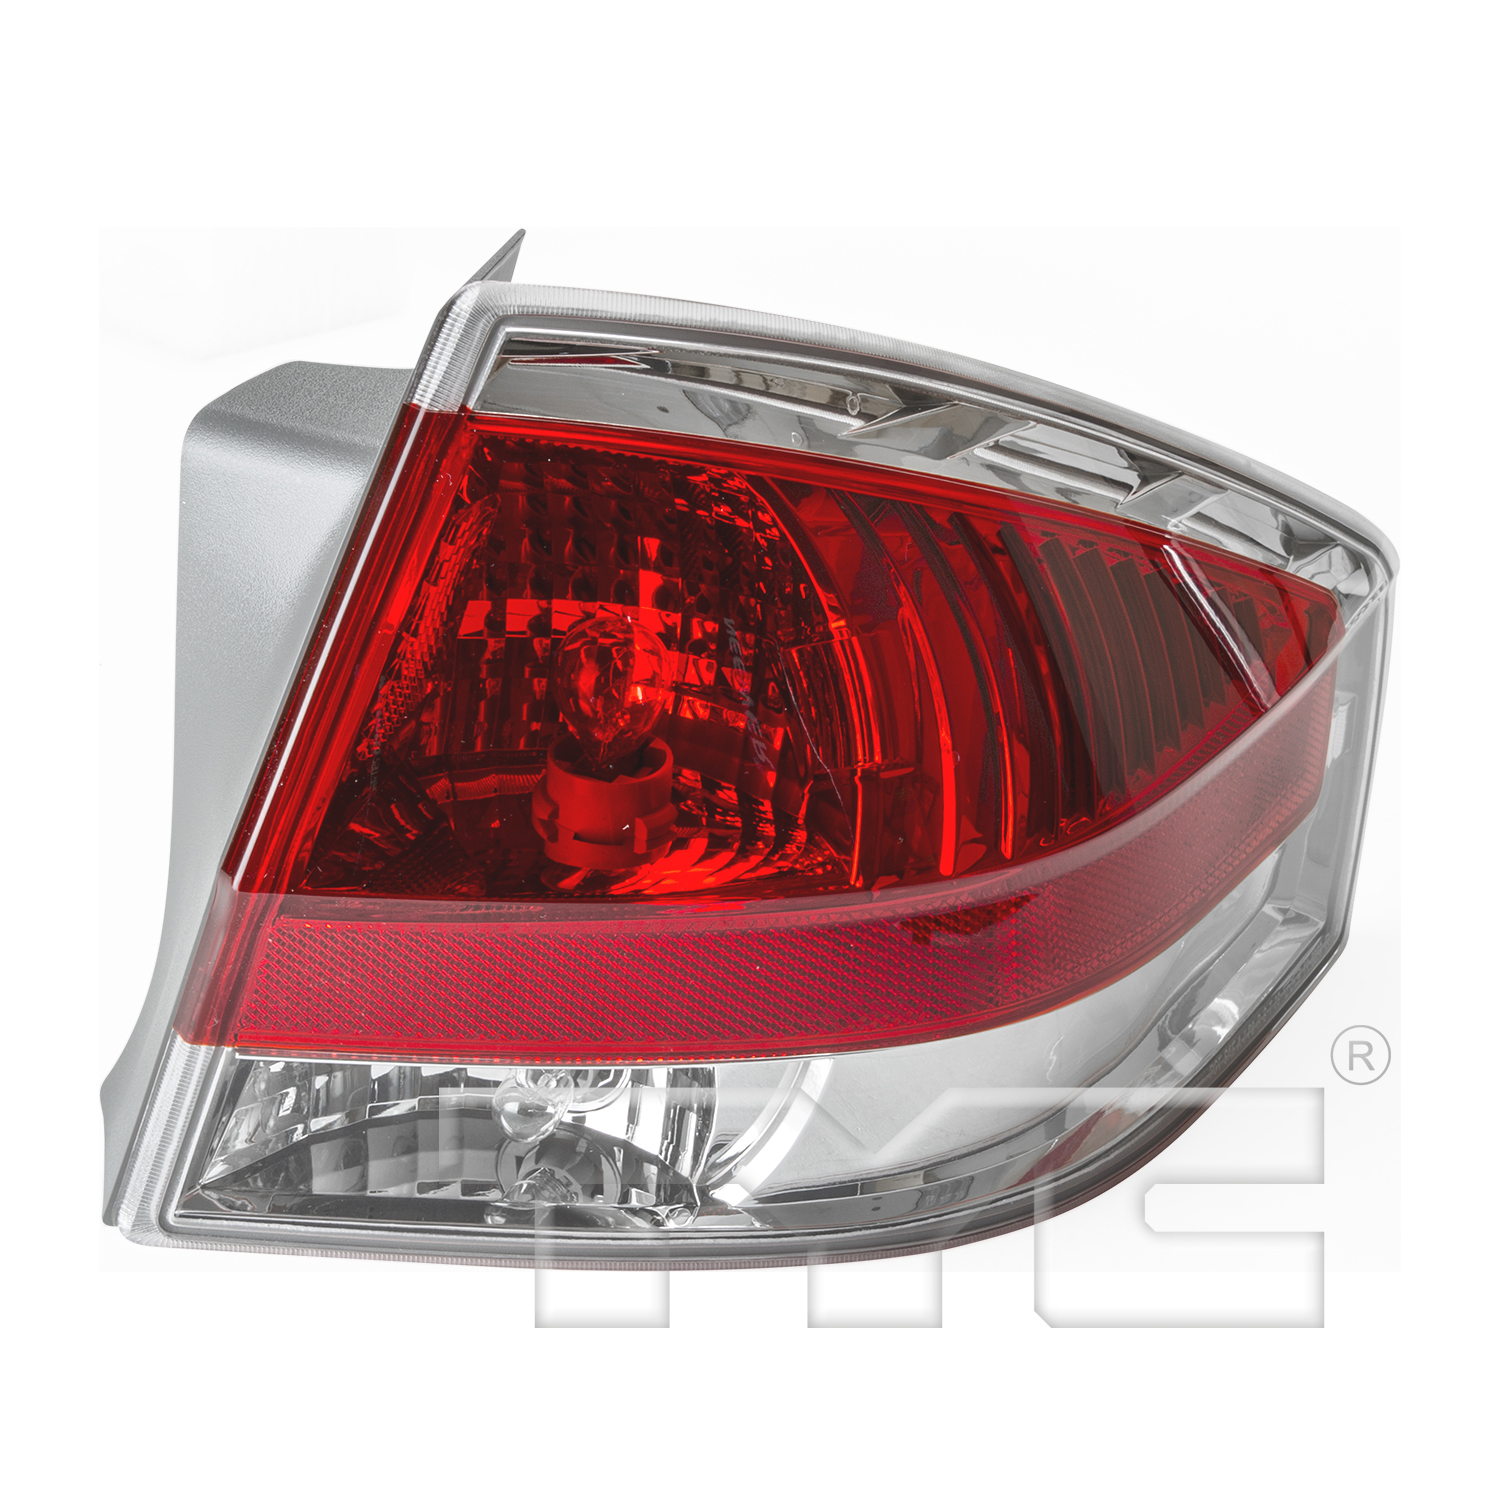 Aftermarket TAILLIGHTS for FORD - FOCUS, FOCUS,07-08,RT Taillamp assy